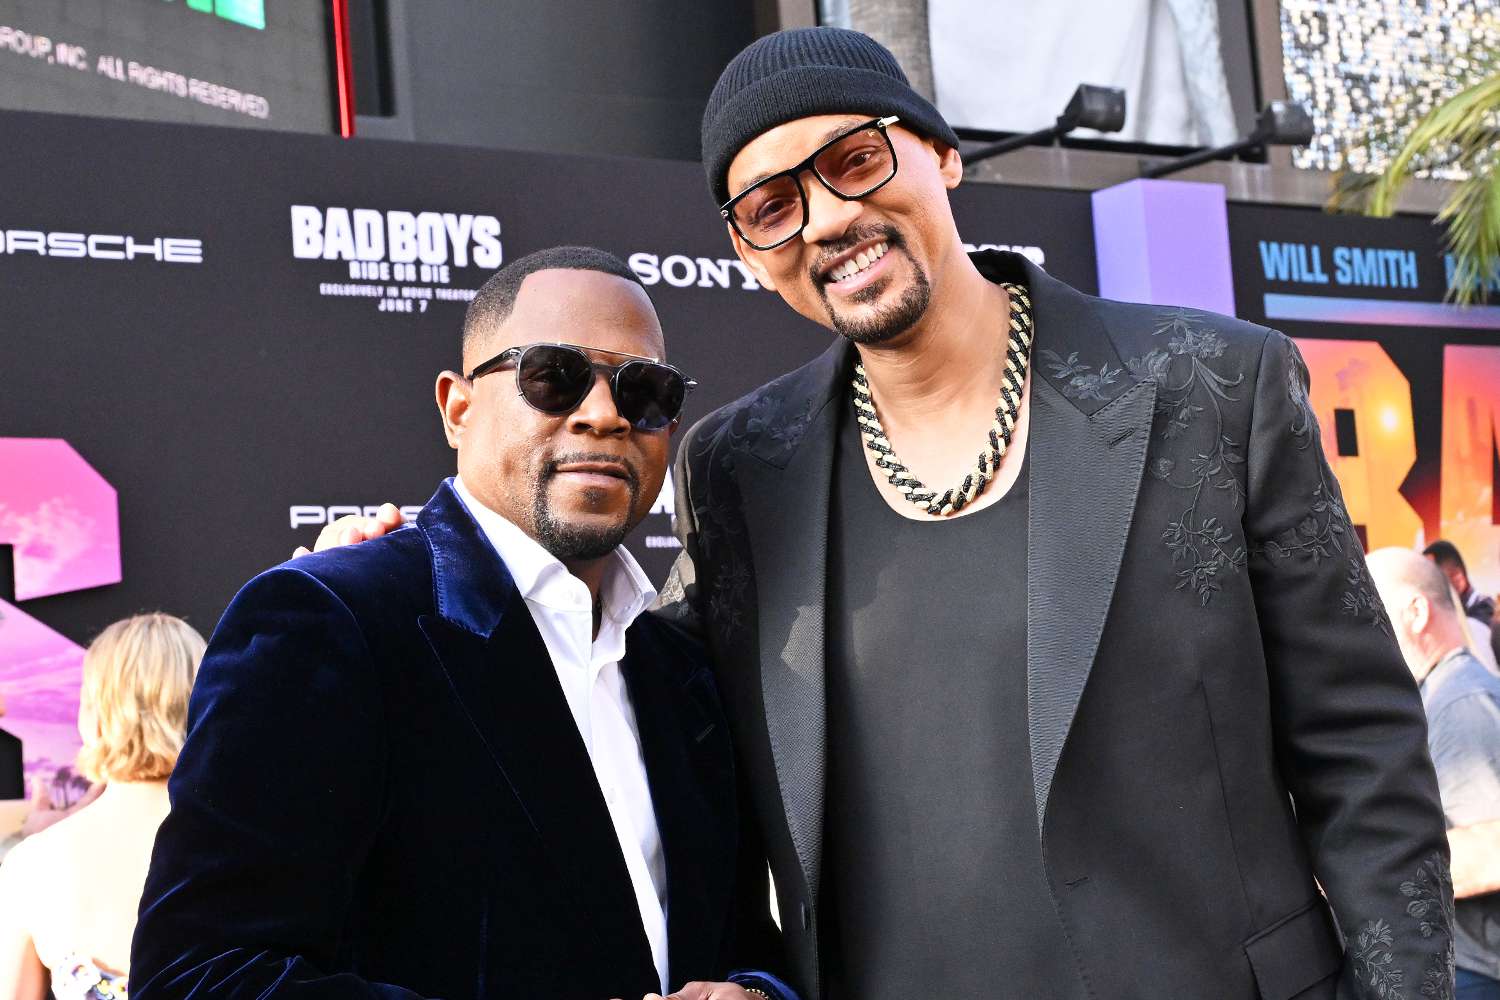 Will Smith Reveals One Quirky Thing About “Bad Boys” Costar Martin Lawrence That Annoys Him (Exclusive)